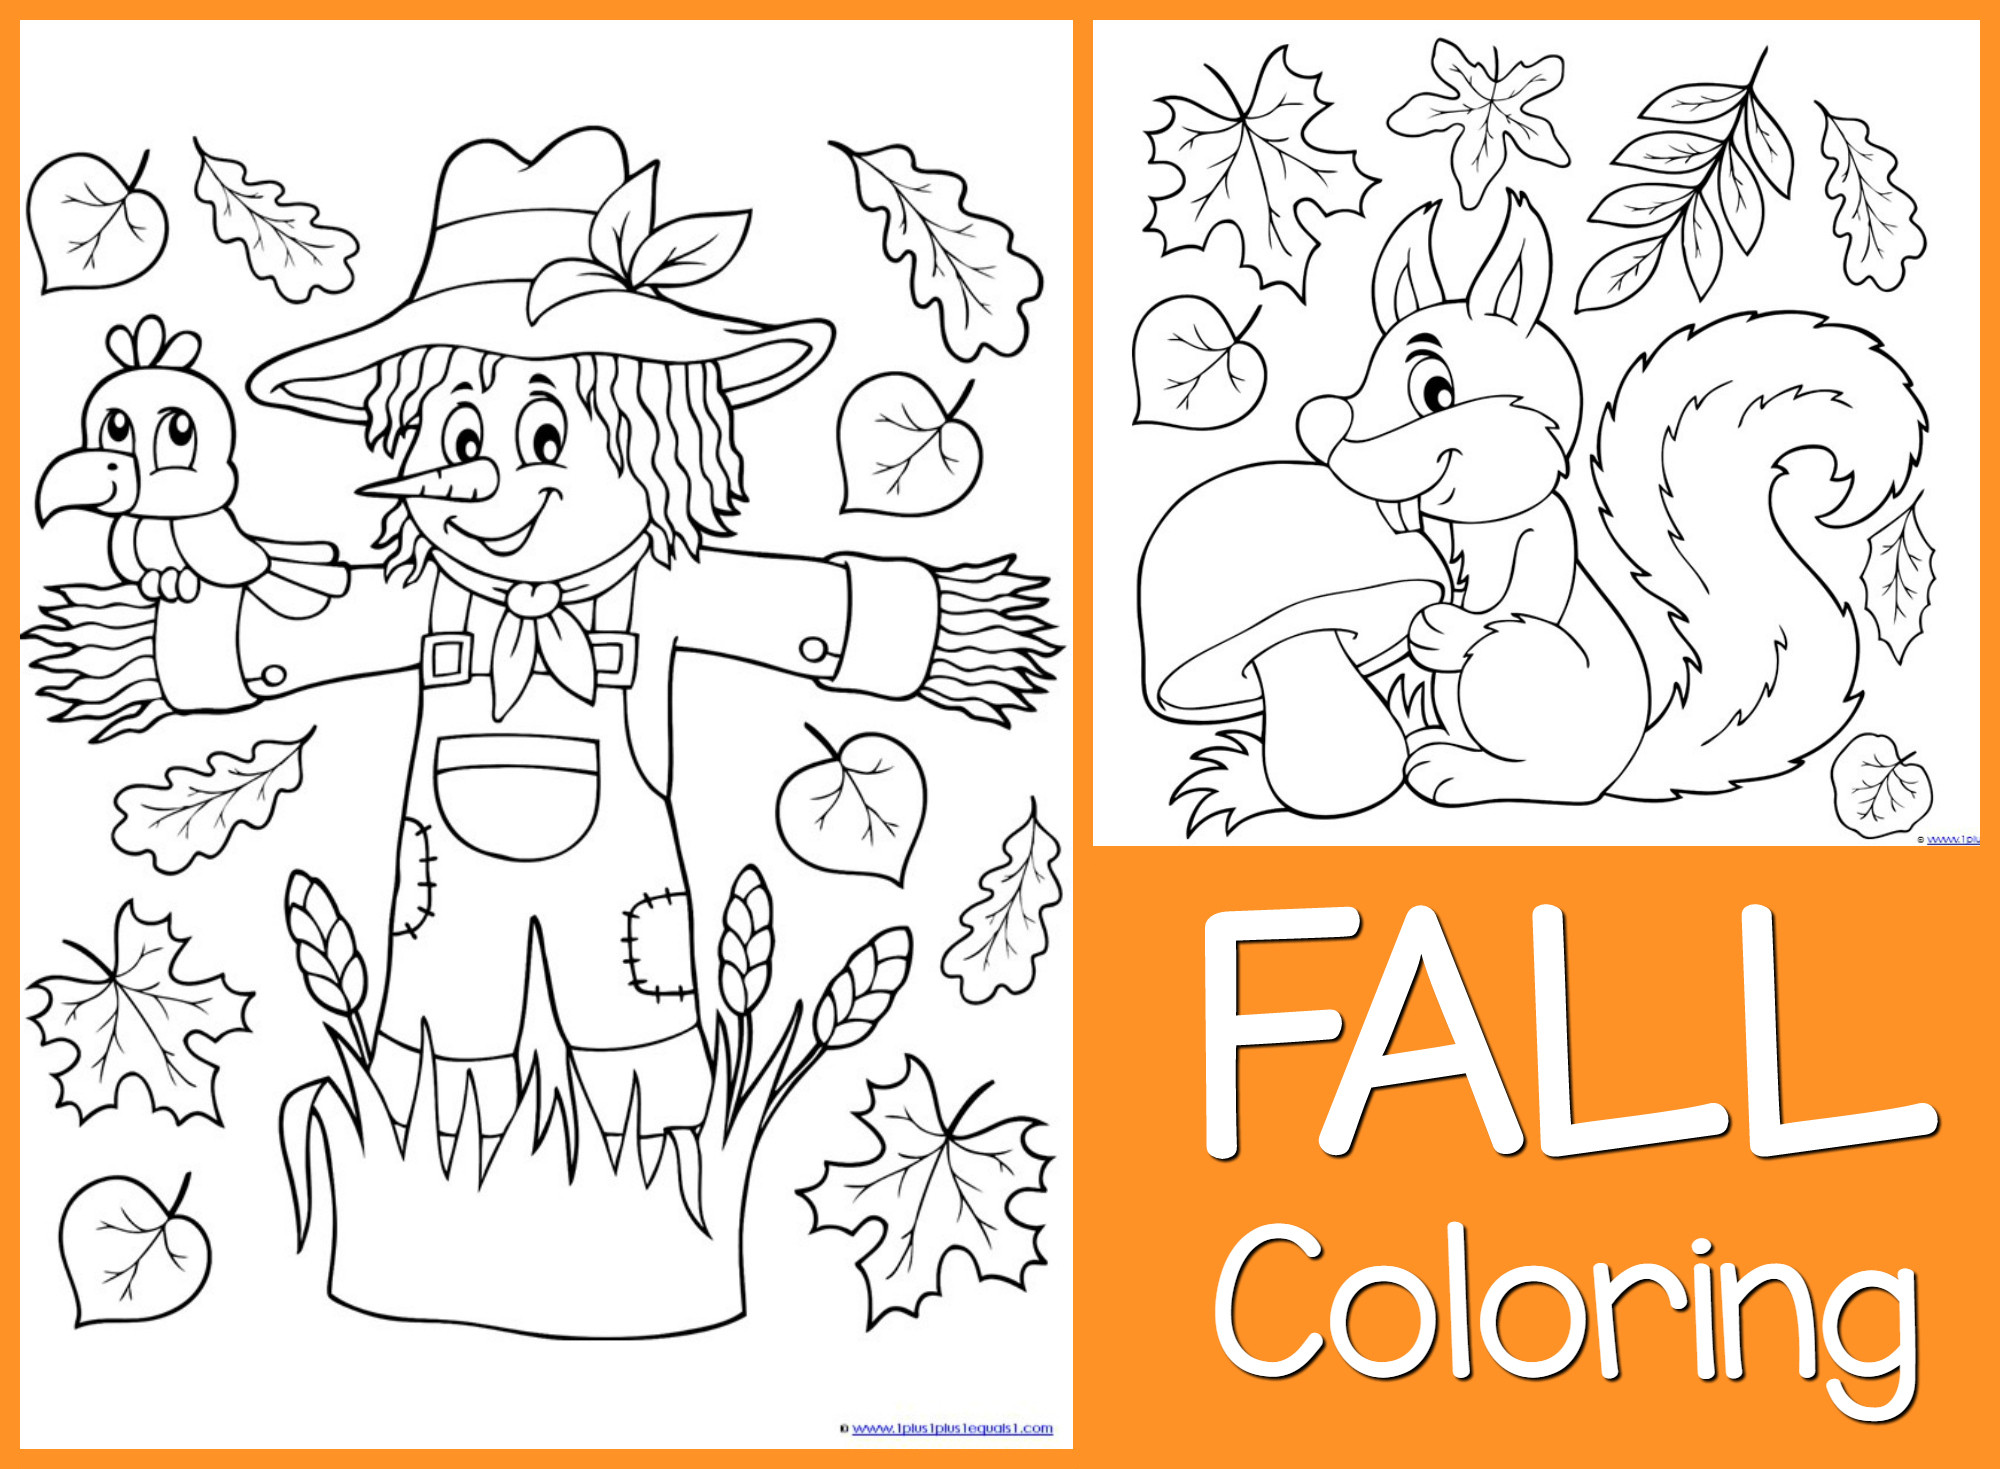 Printable Coloring Pages Fall
 Just Color Free Coloring Printables